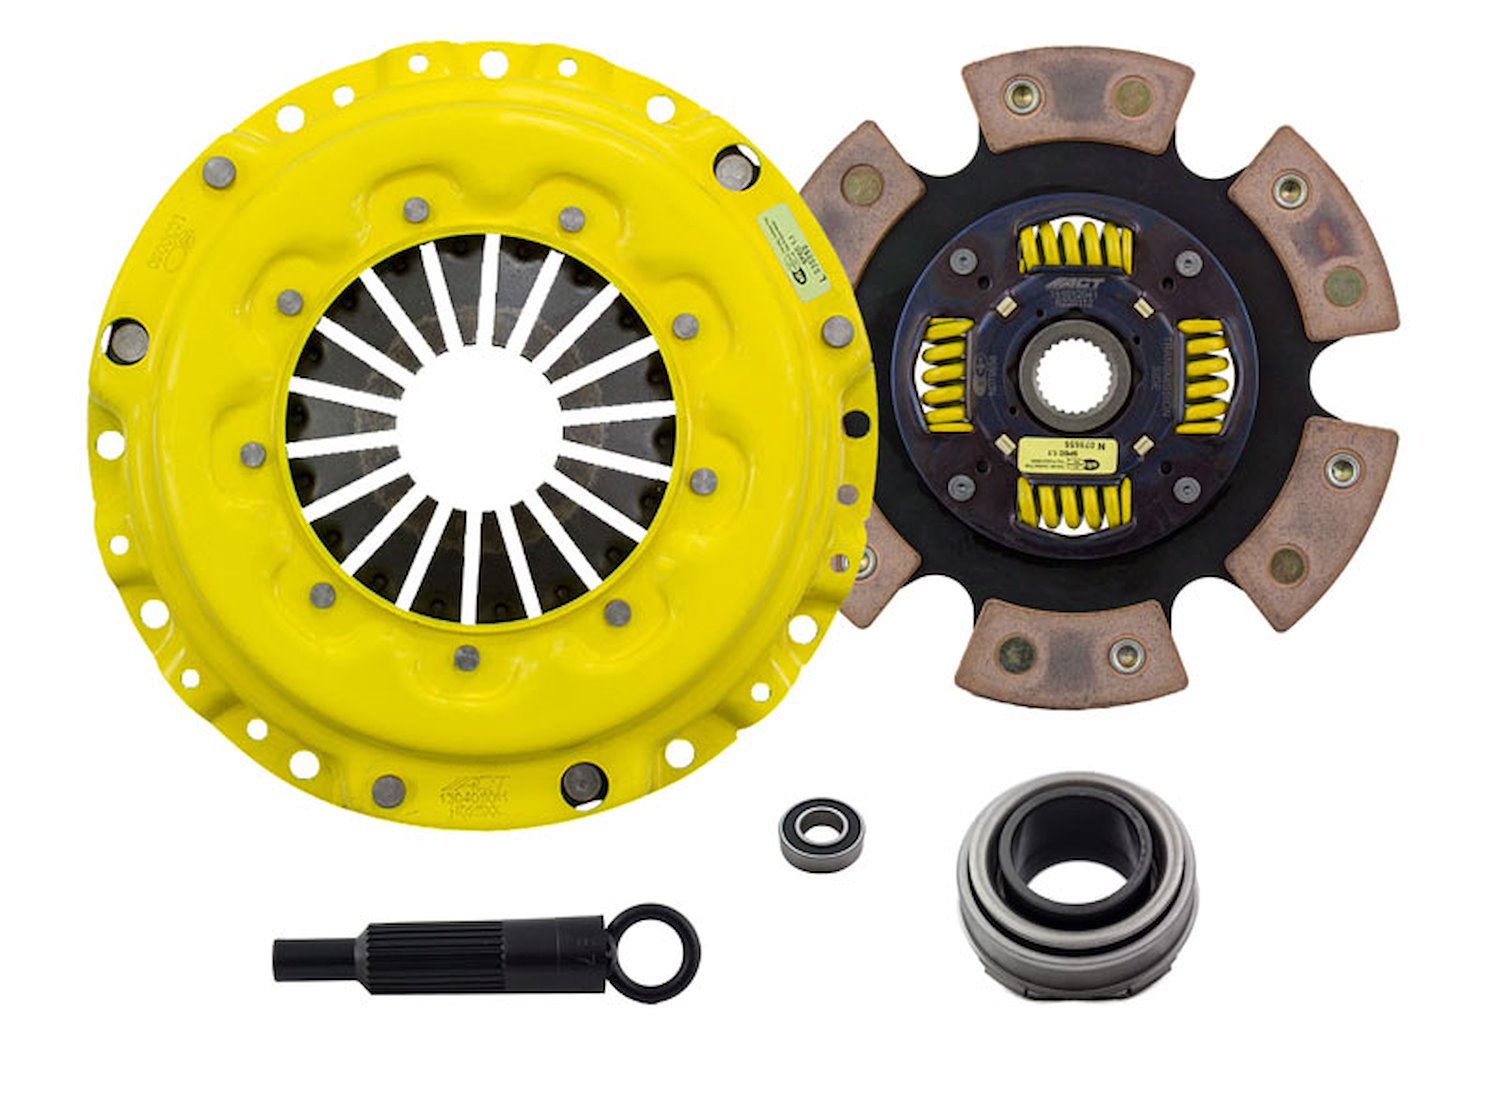 MaXX/Race Sprung 6-Pad Transmission Clutch Kit Fits Select Acura/Honda